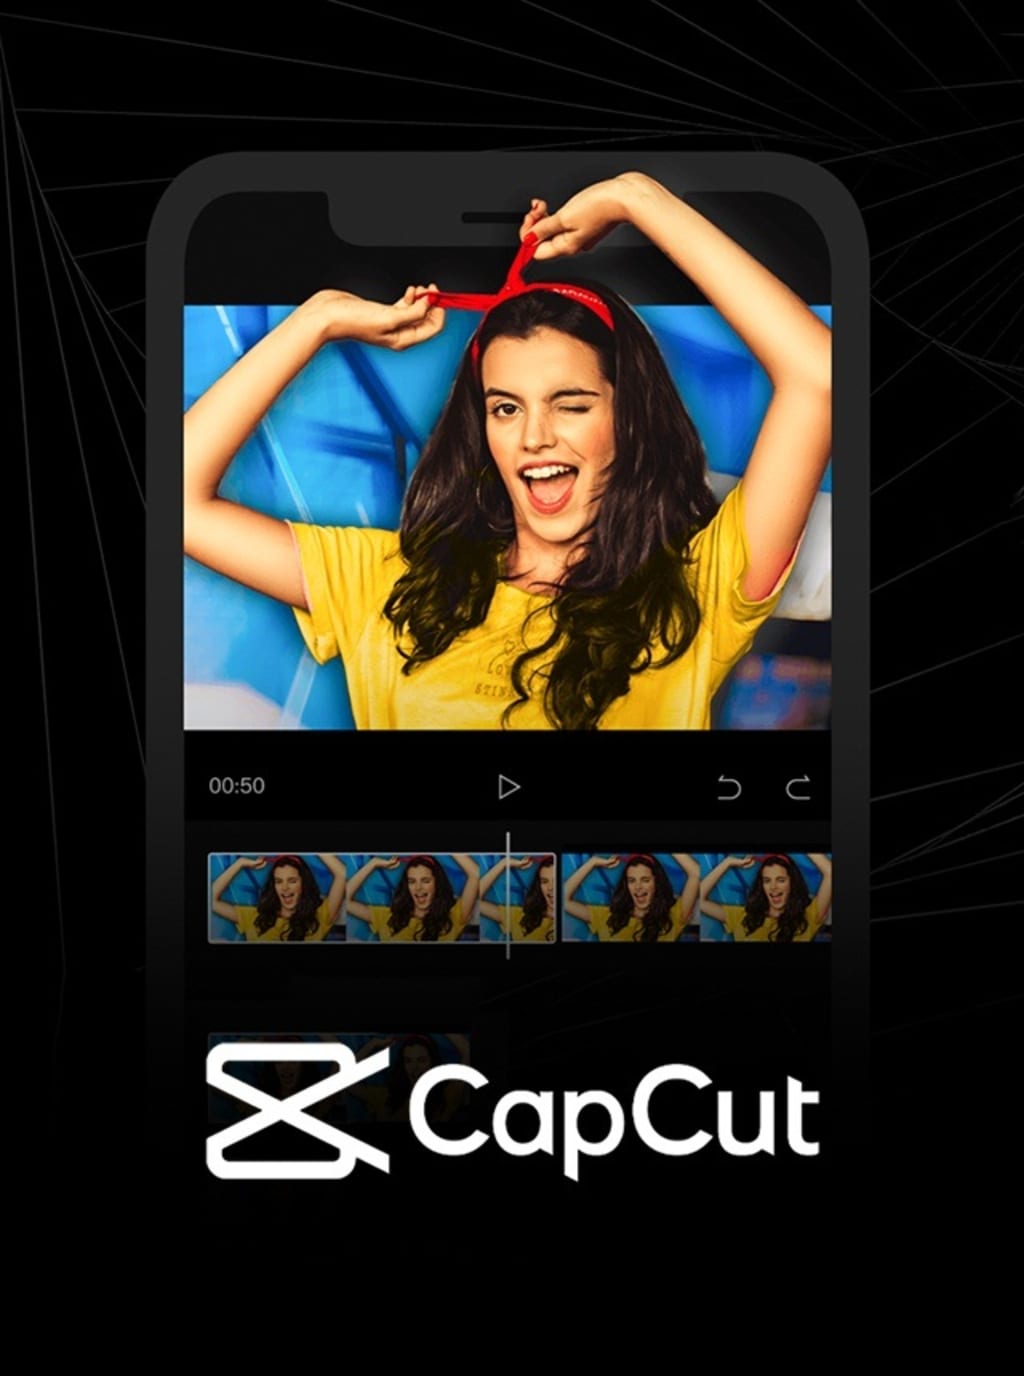 CapCut: why is the editing app so popular among TikTok users